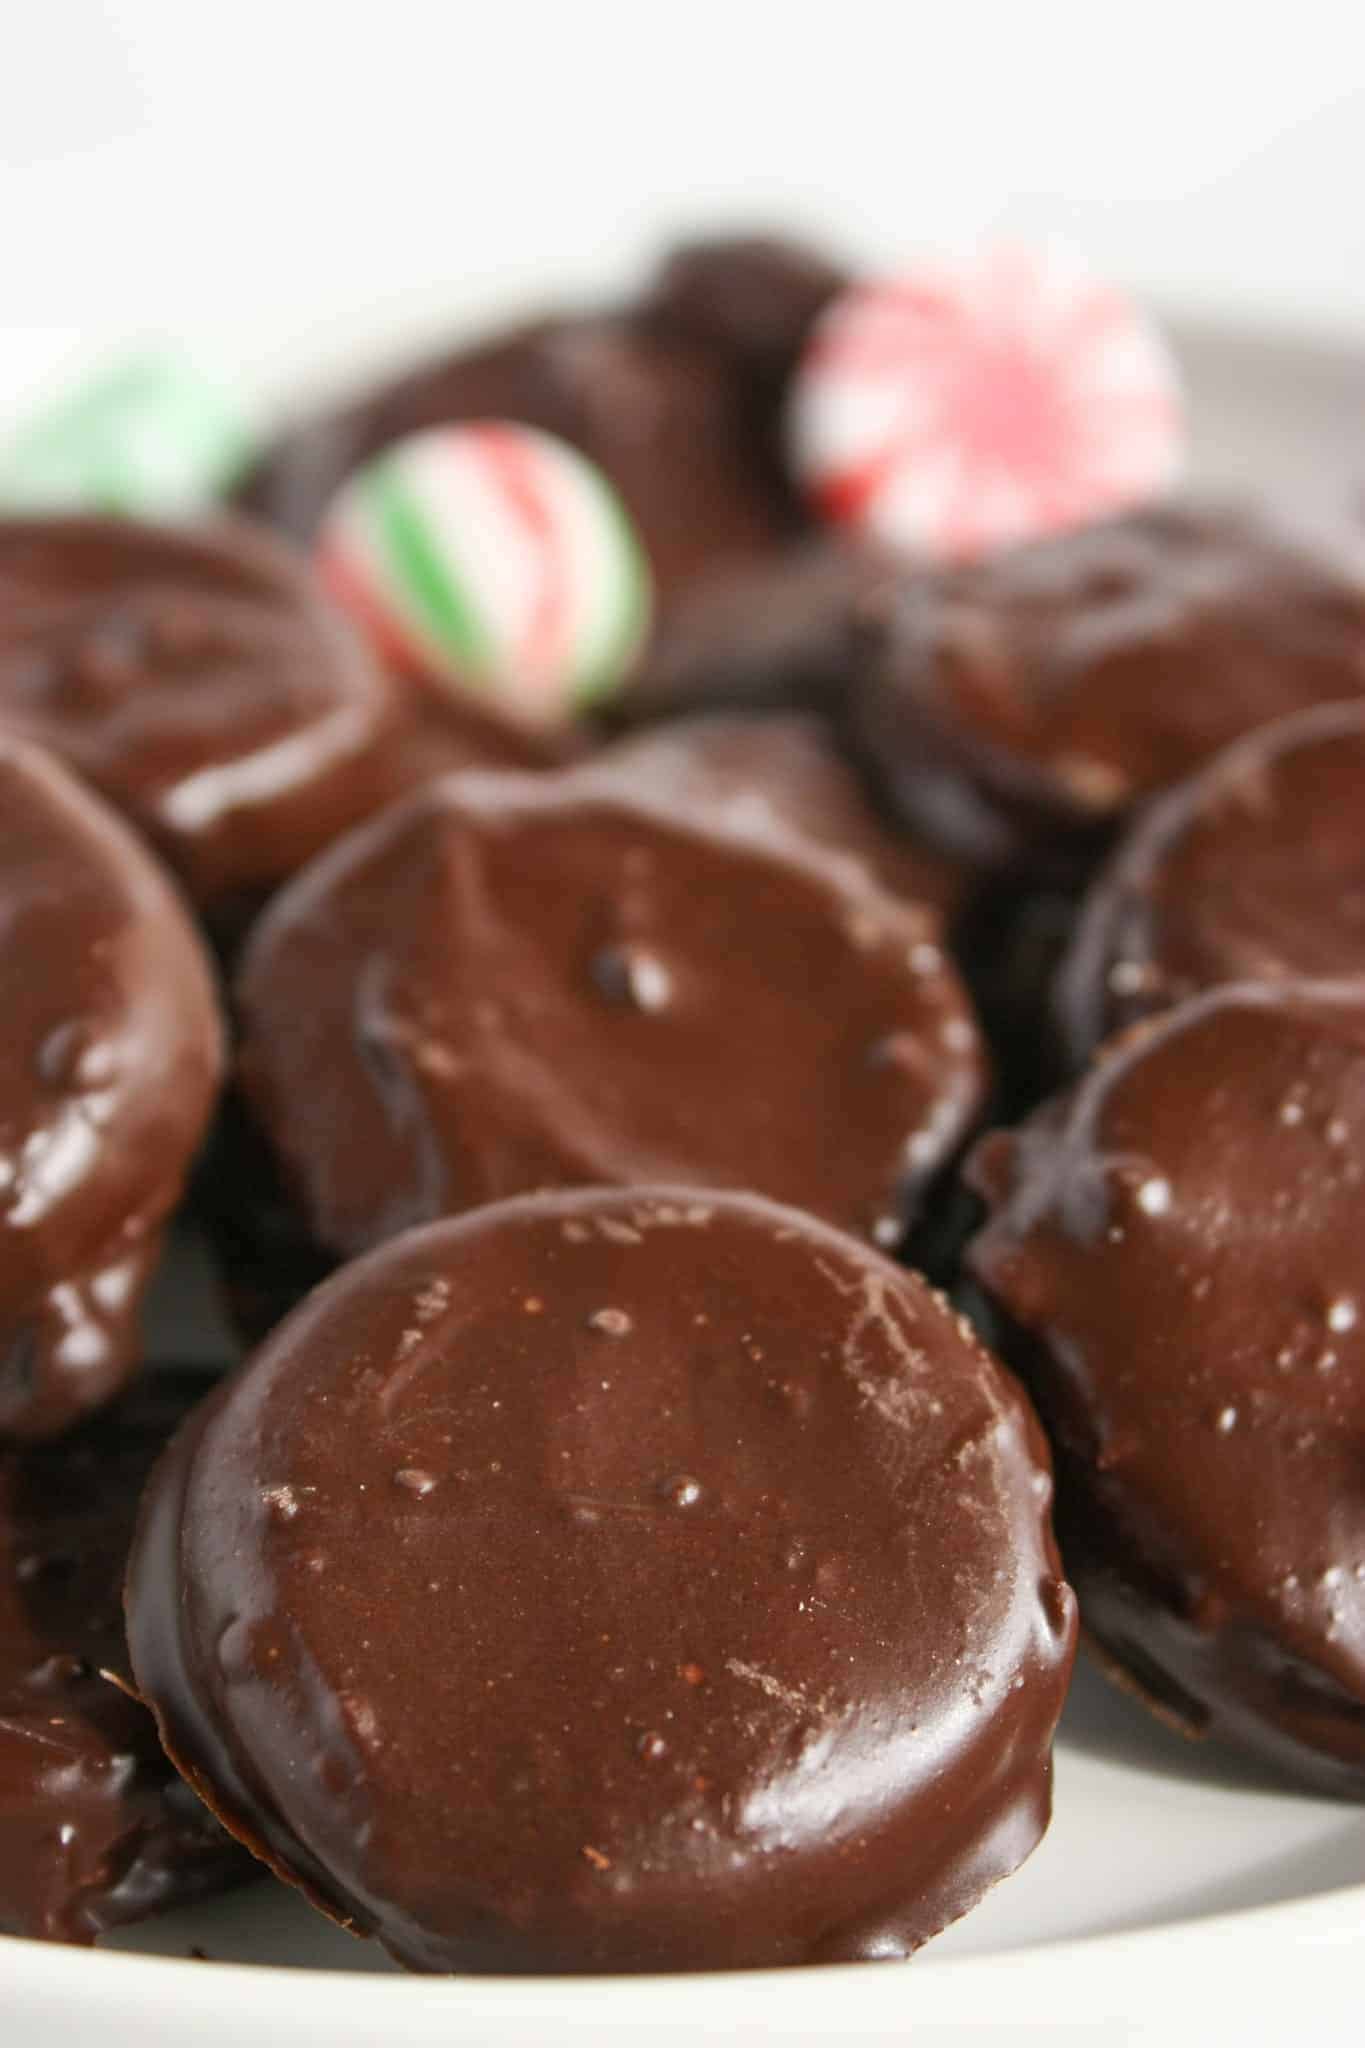 Peppermint Patties are a nice refreshing treat as an afternoon pick me up or following an evening meal.  These gluten free candies are a great addition to your holiday dessert tray.